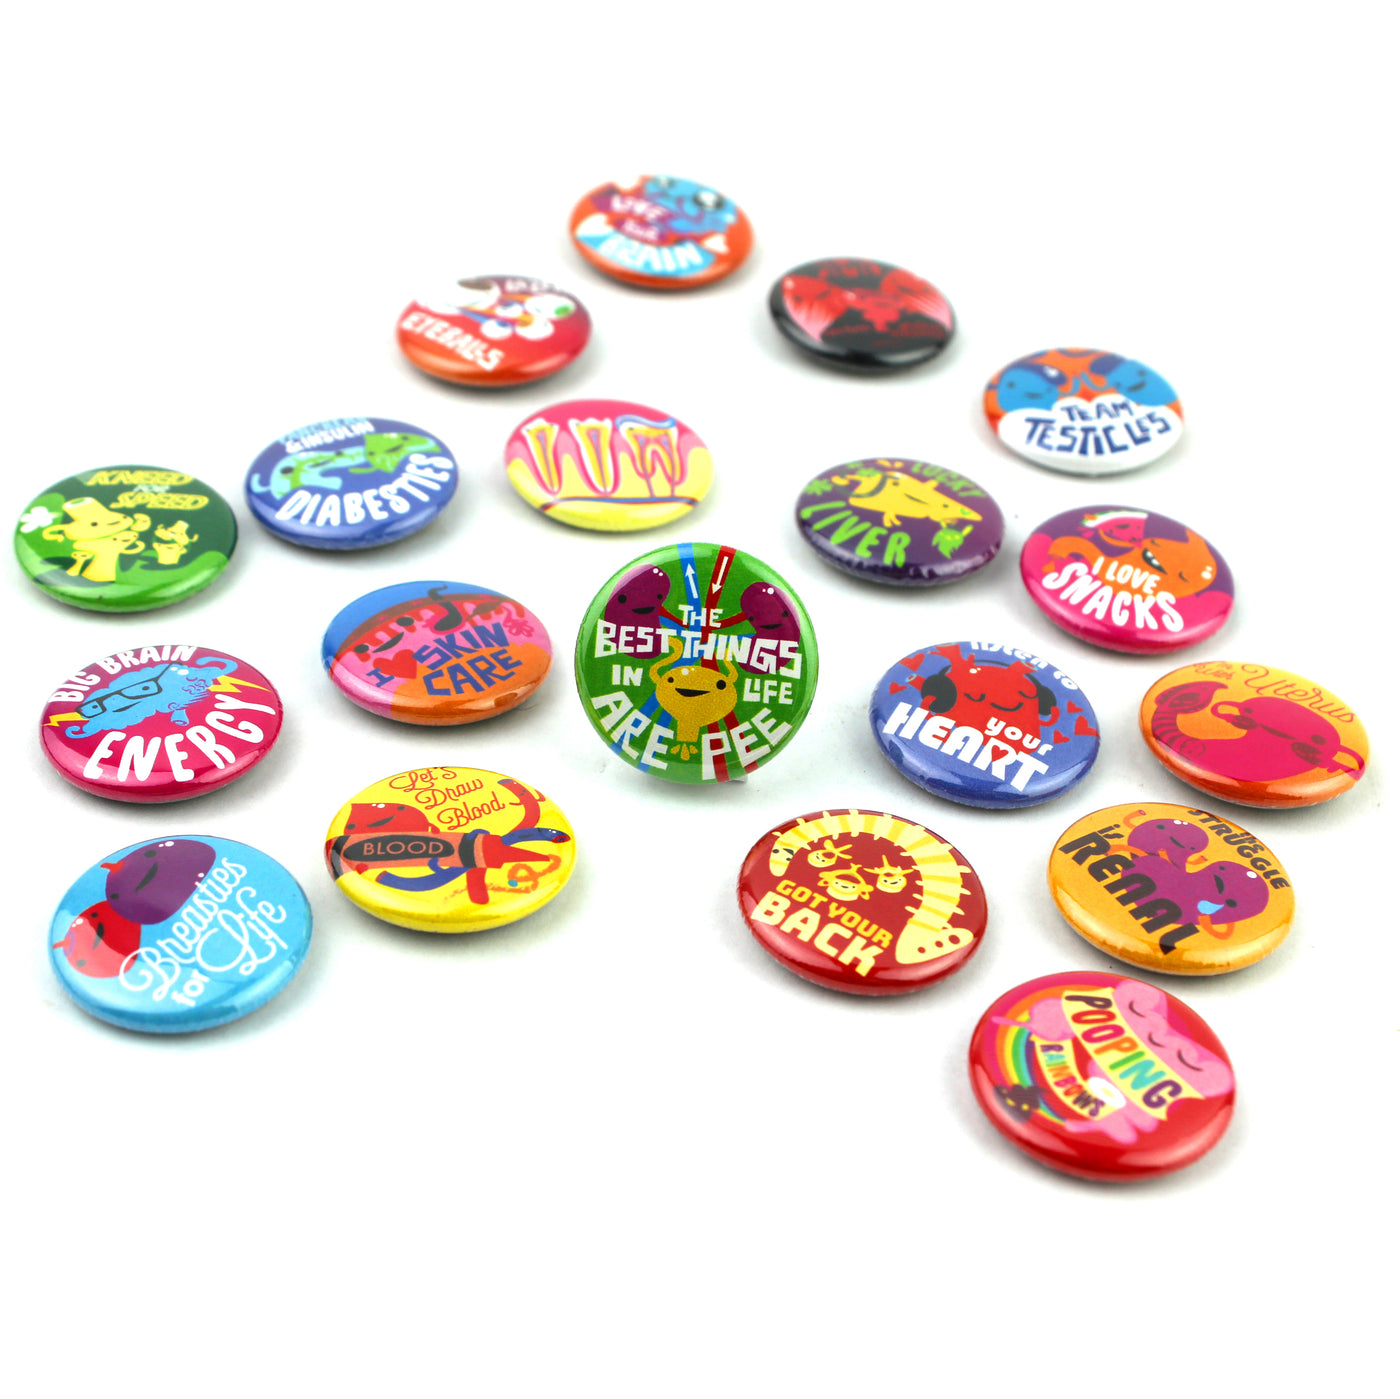 Funny Pins and Buttons for Sale